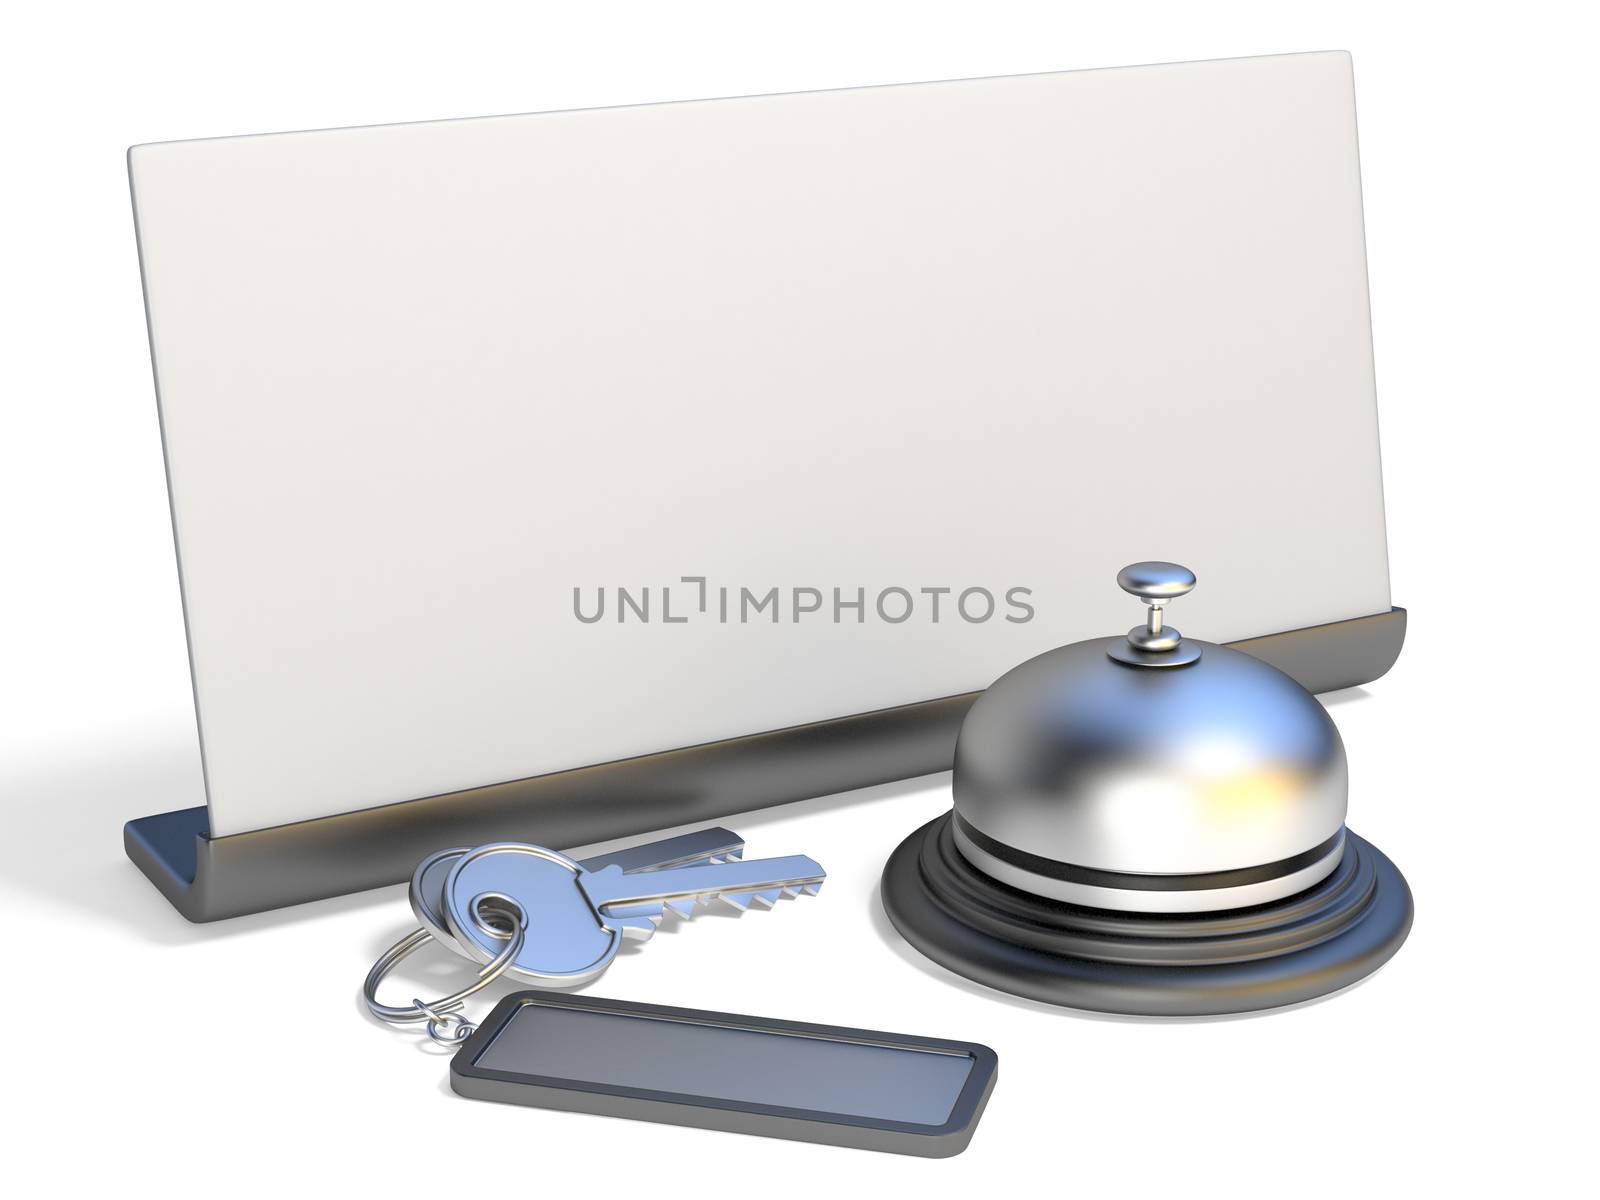 Hotel bell, blank sign and hotel keys 3D render illustration isolated on white background